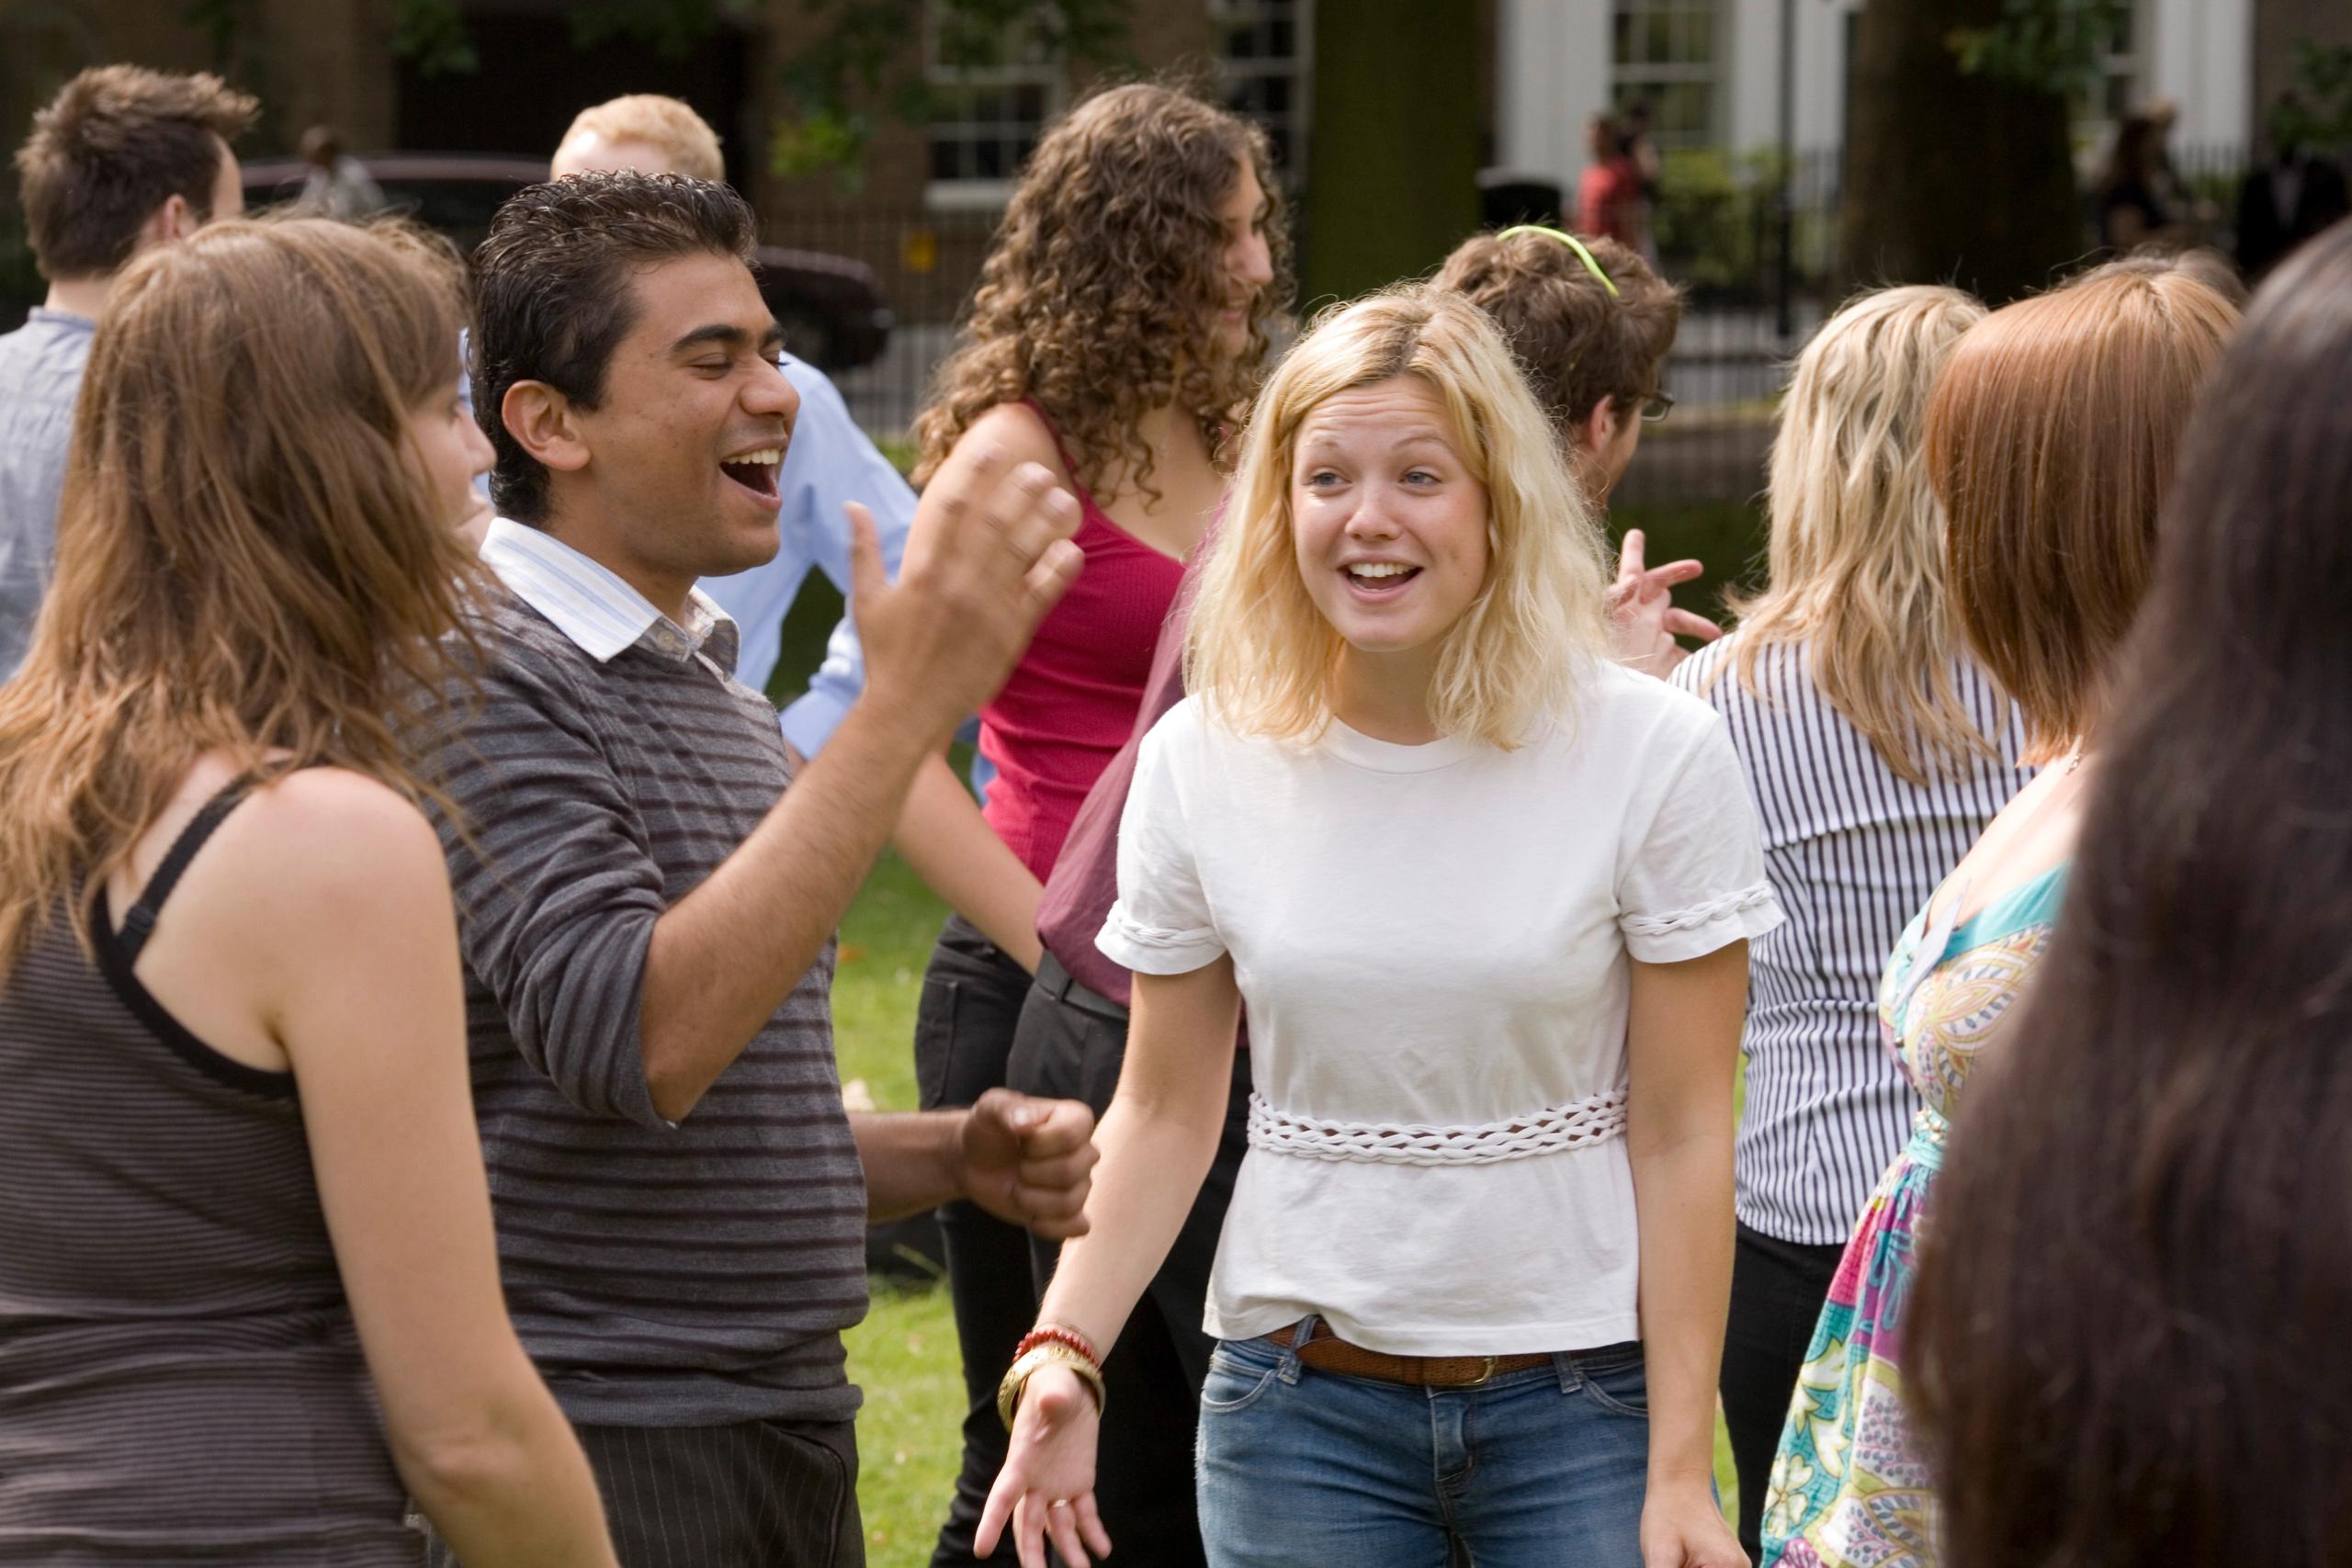 A group of young people laughing outdoors